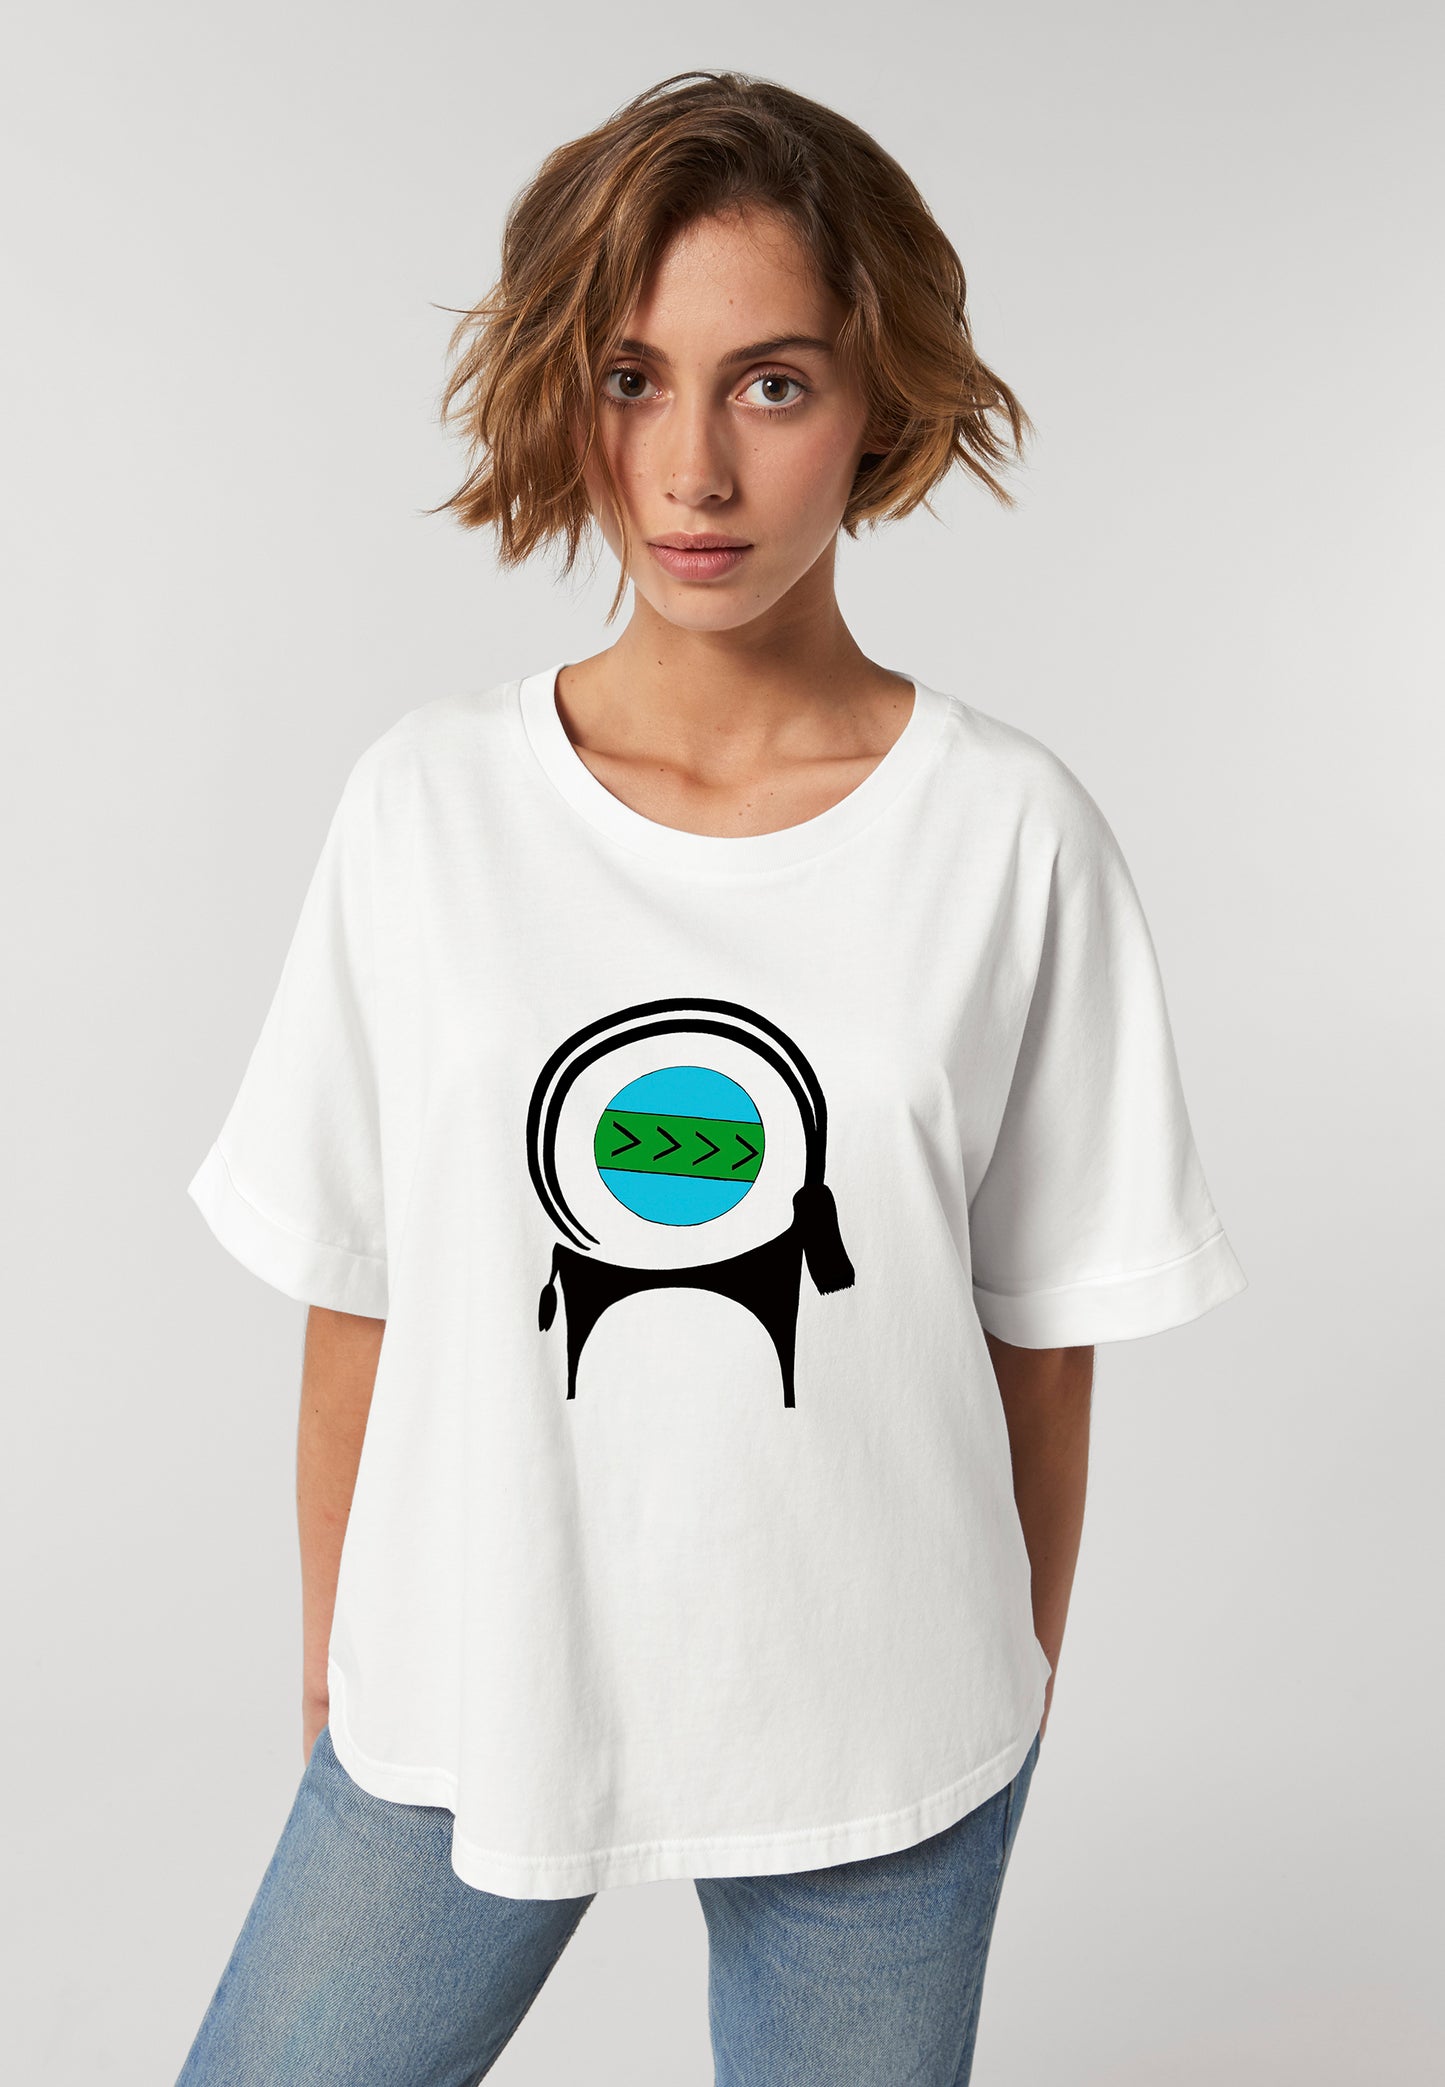 CAPRA-T-shirt oversize vintage, T-shirt in jersey stampato in colore bianco